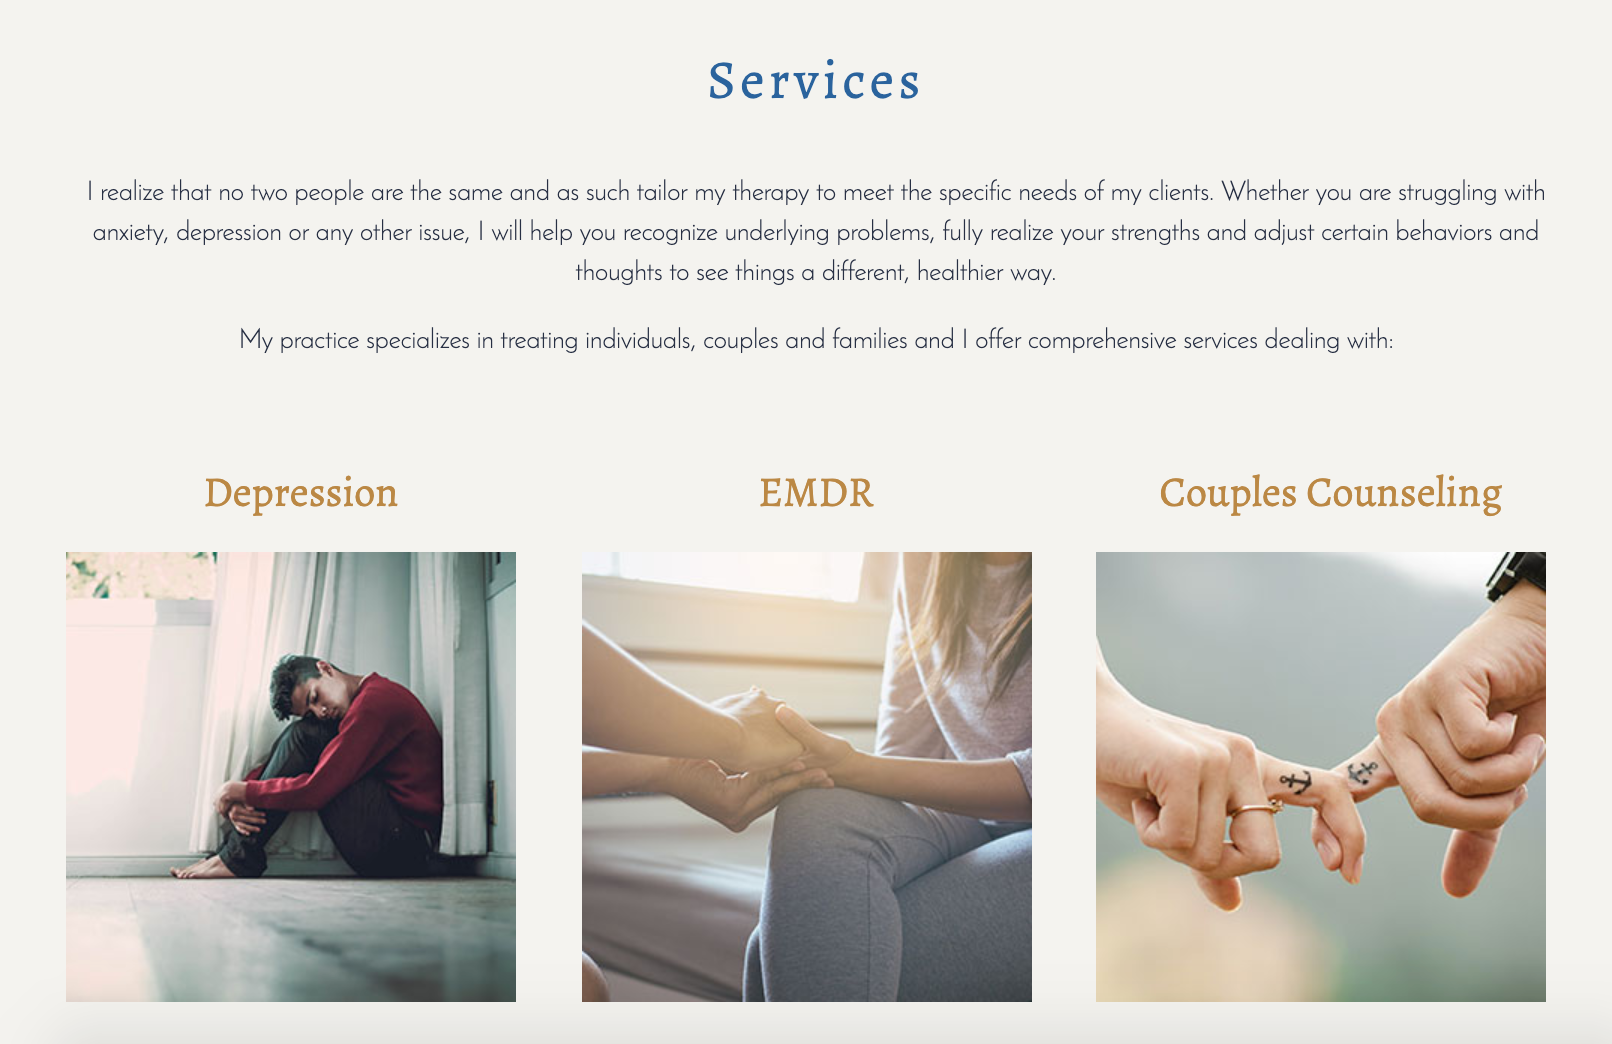 Specialty services | New Therapist Website Theme: Denver | Brighter Vision Web Solutions | Custom Websites for Therapists